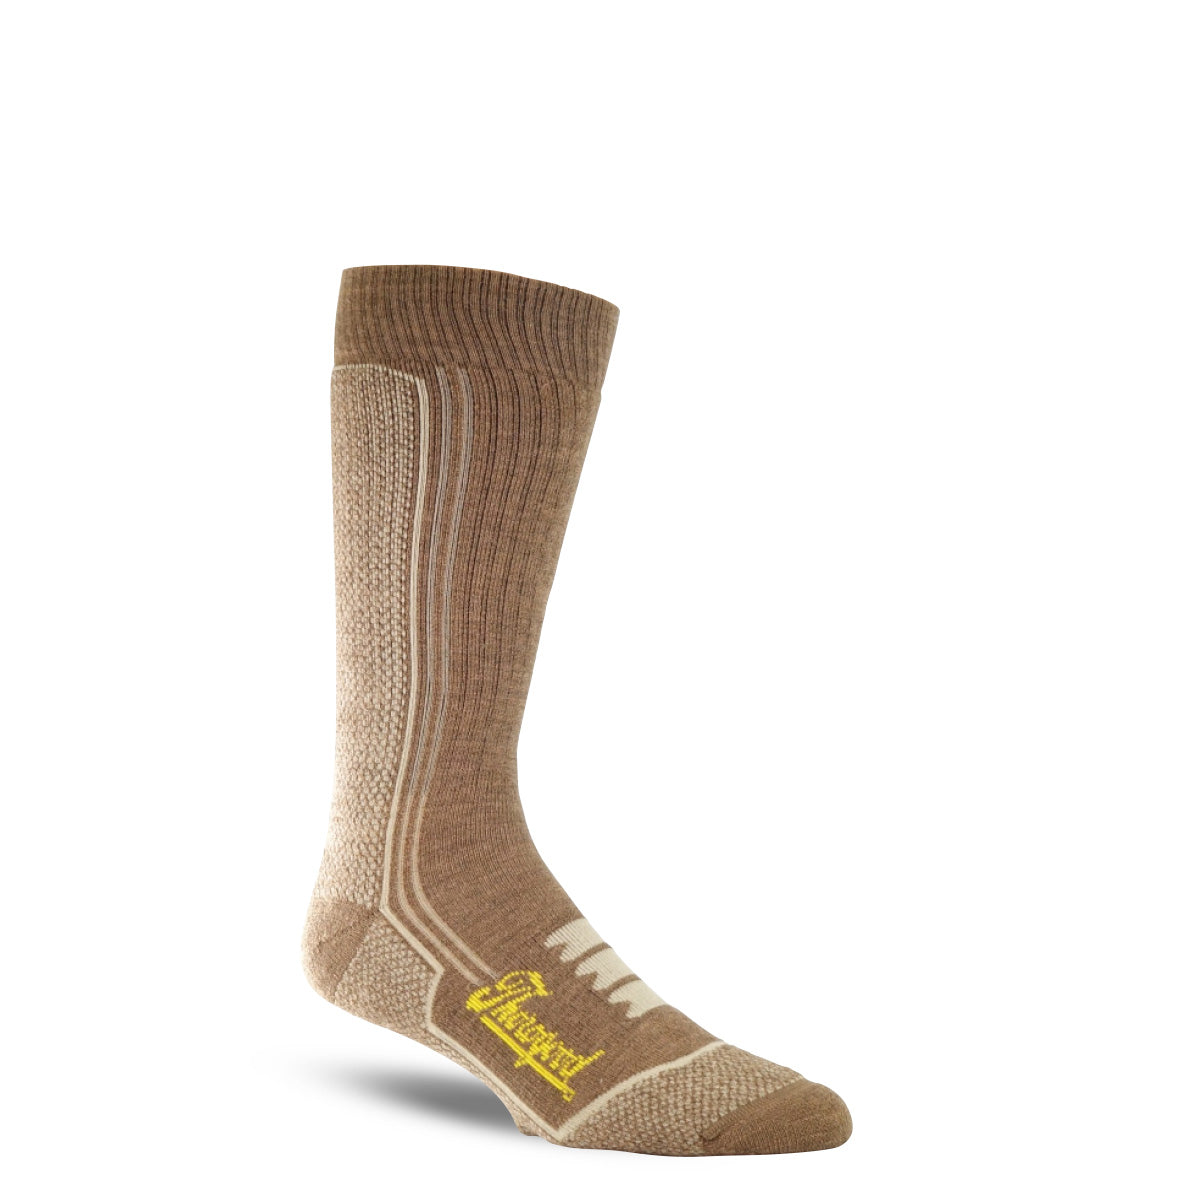 Thorogood Men's Heavy Duty Sock in Coyote from the side